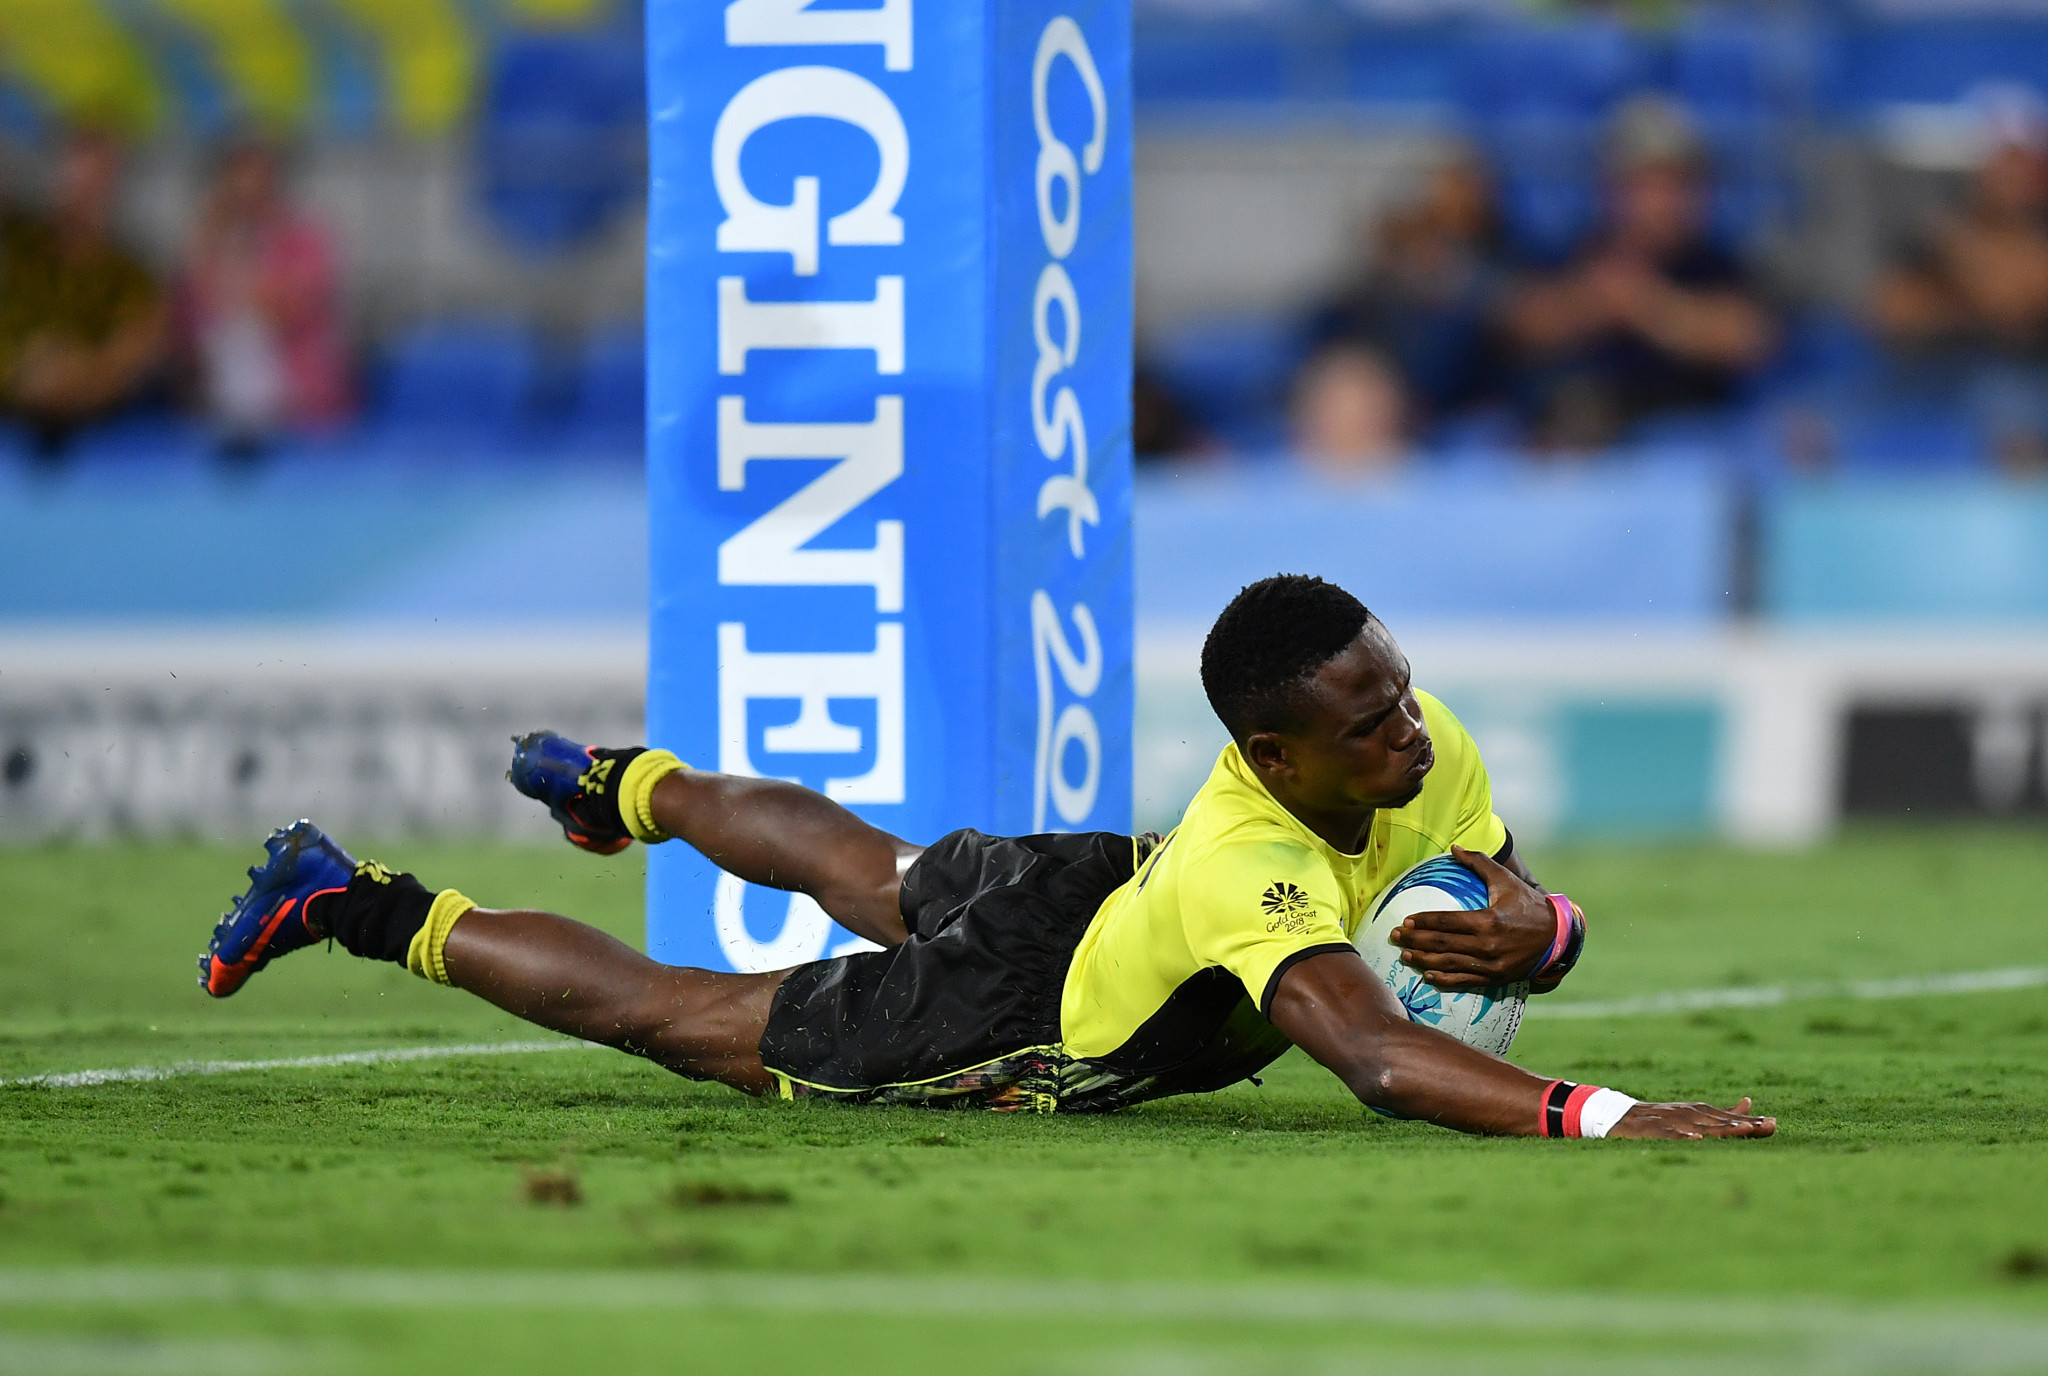 Uganda out of Olympic rugby sevens qualifier following COVID-19 outbreak